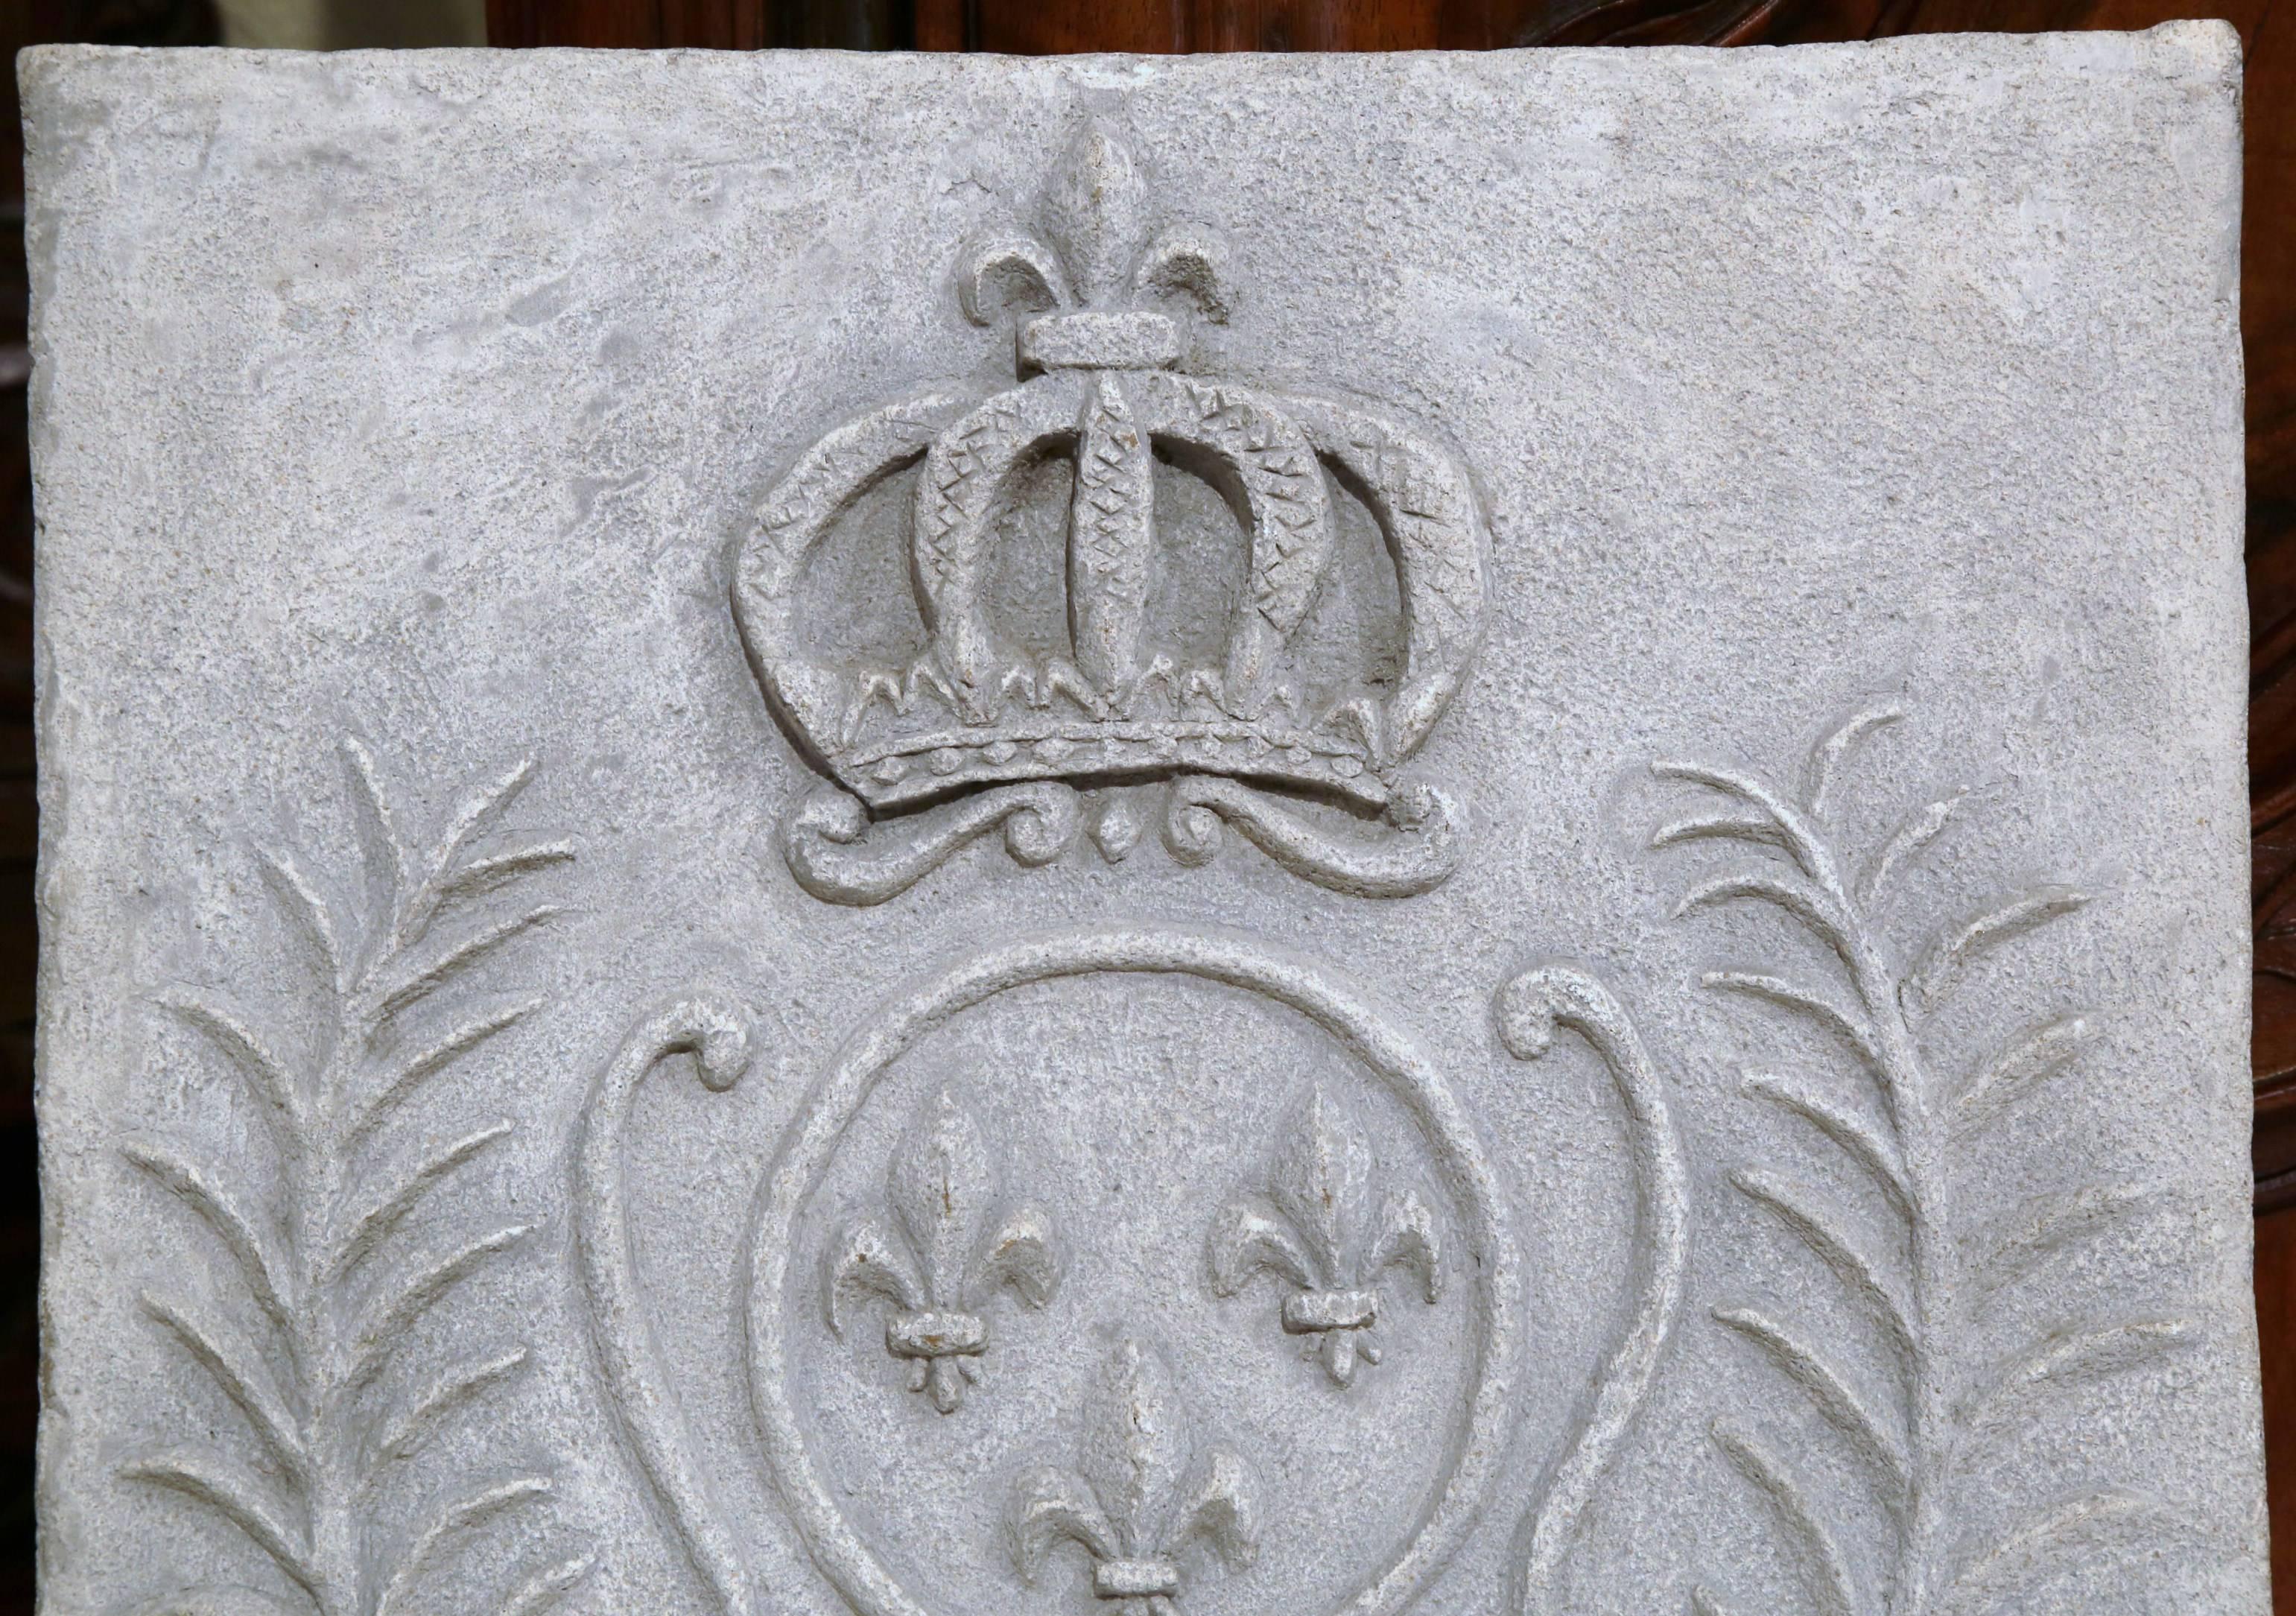 Cast Stone 19th Century French Carved Stone Kingdom of France Crest with Fleurs De Lys